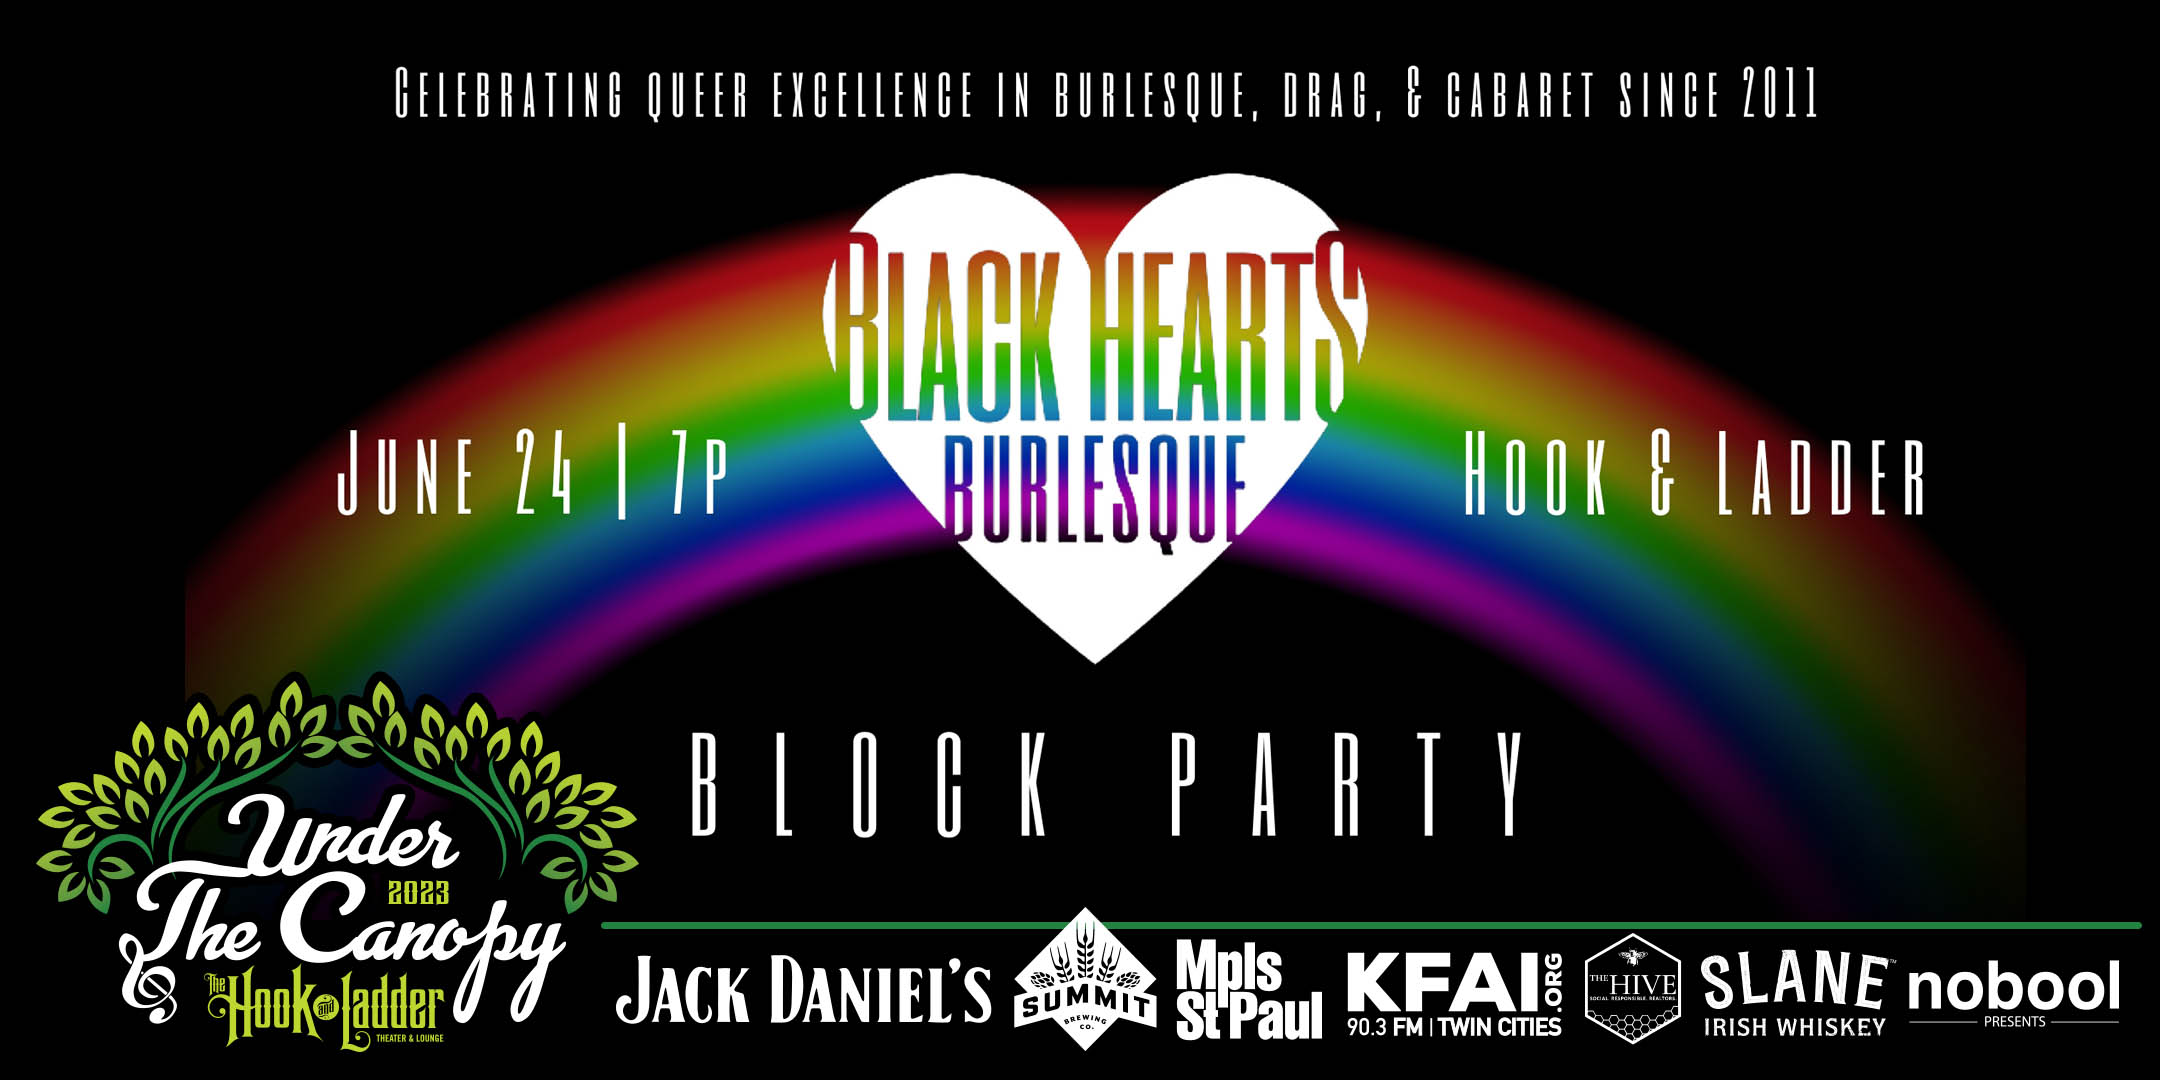 Black Hearts Burlesque Block Party Saturday, June 24 Under The Canopy at The Hook and Ladder Theater "An Urban Outdoor Summer Concert Series" Doors 6:00pm :: Music 7:00pm :: 21+ VIP: $75 (Includes EXTRA AS F*CK Afterparty) GA: $25 ADV / $30 DOS